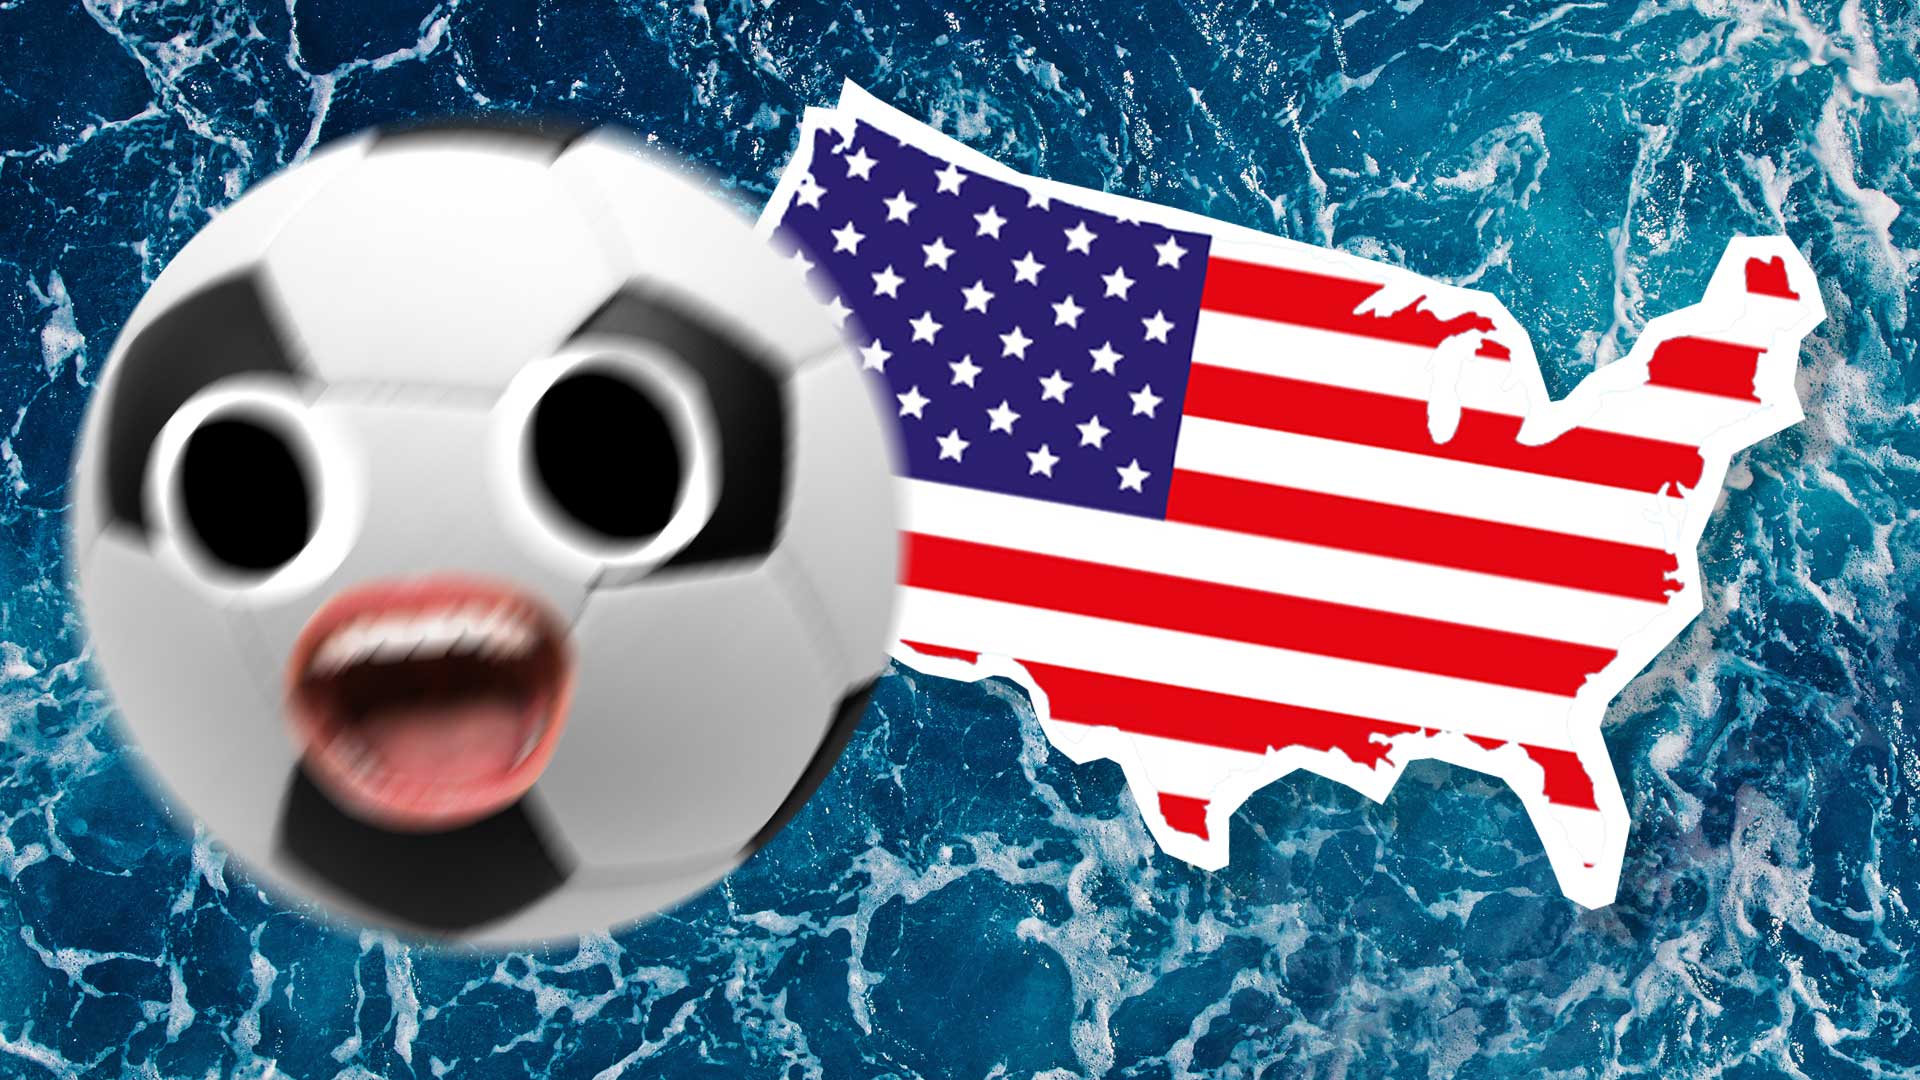 USA shaped map and a football, with a sea background